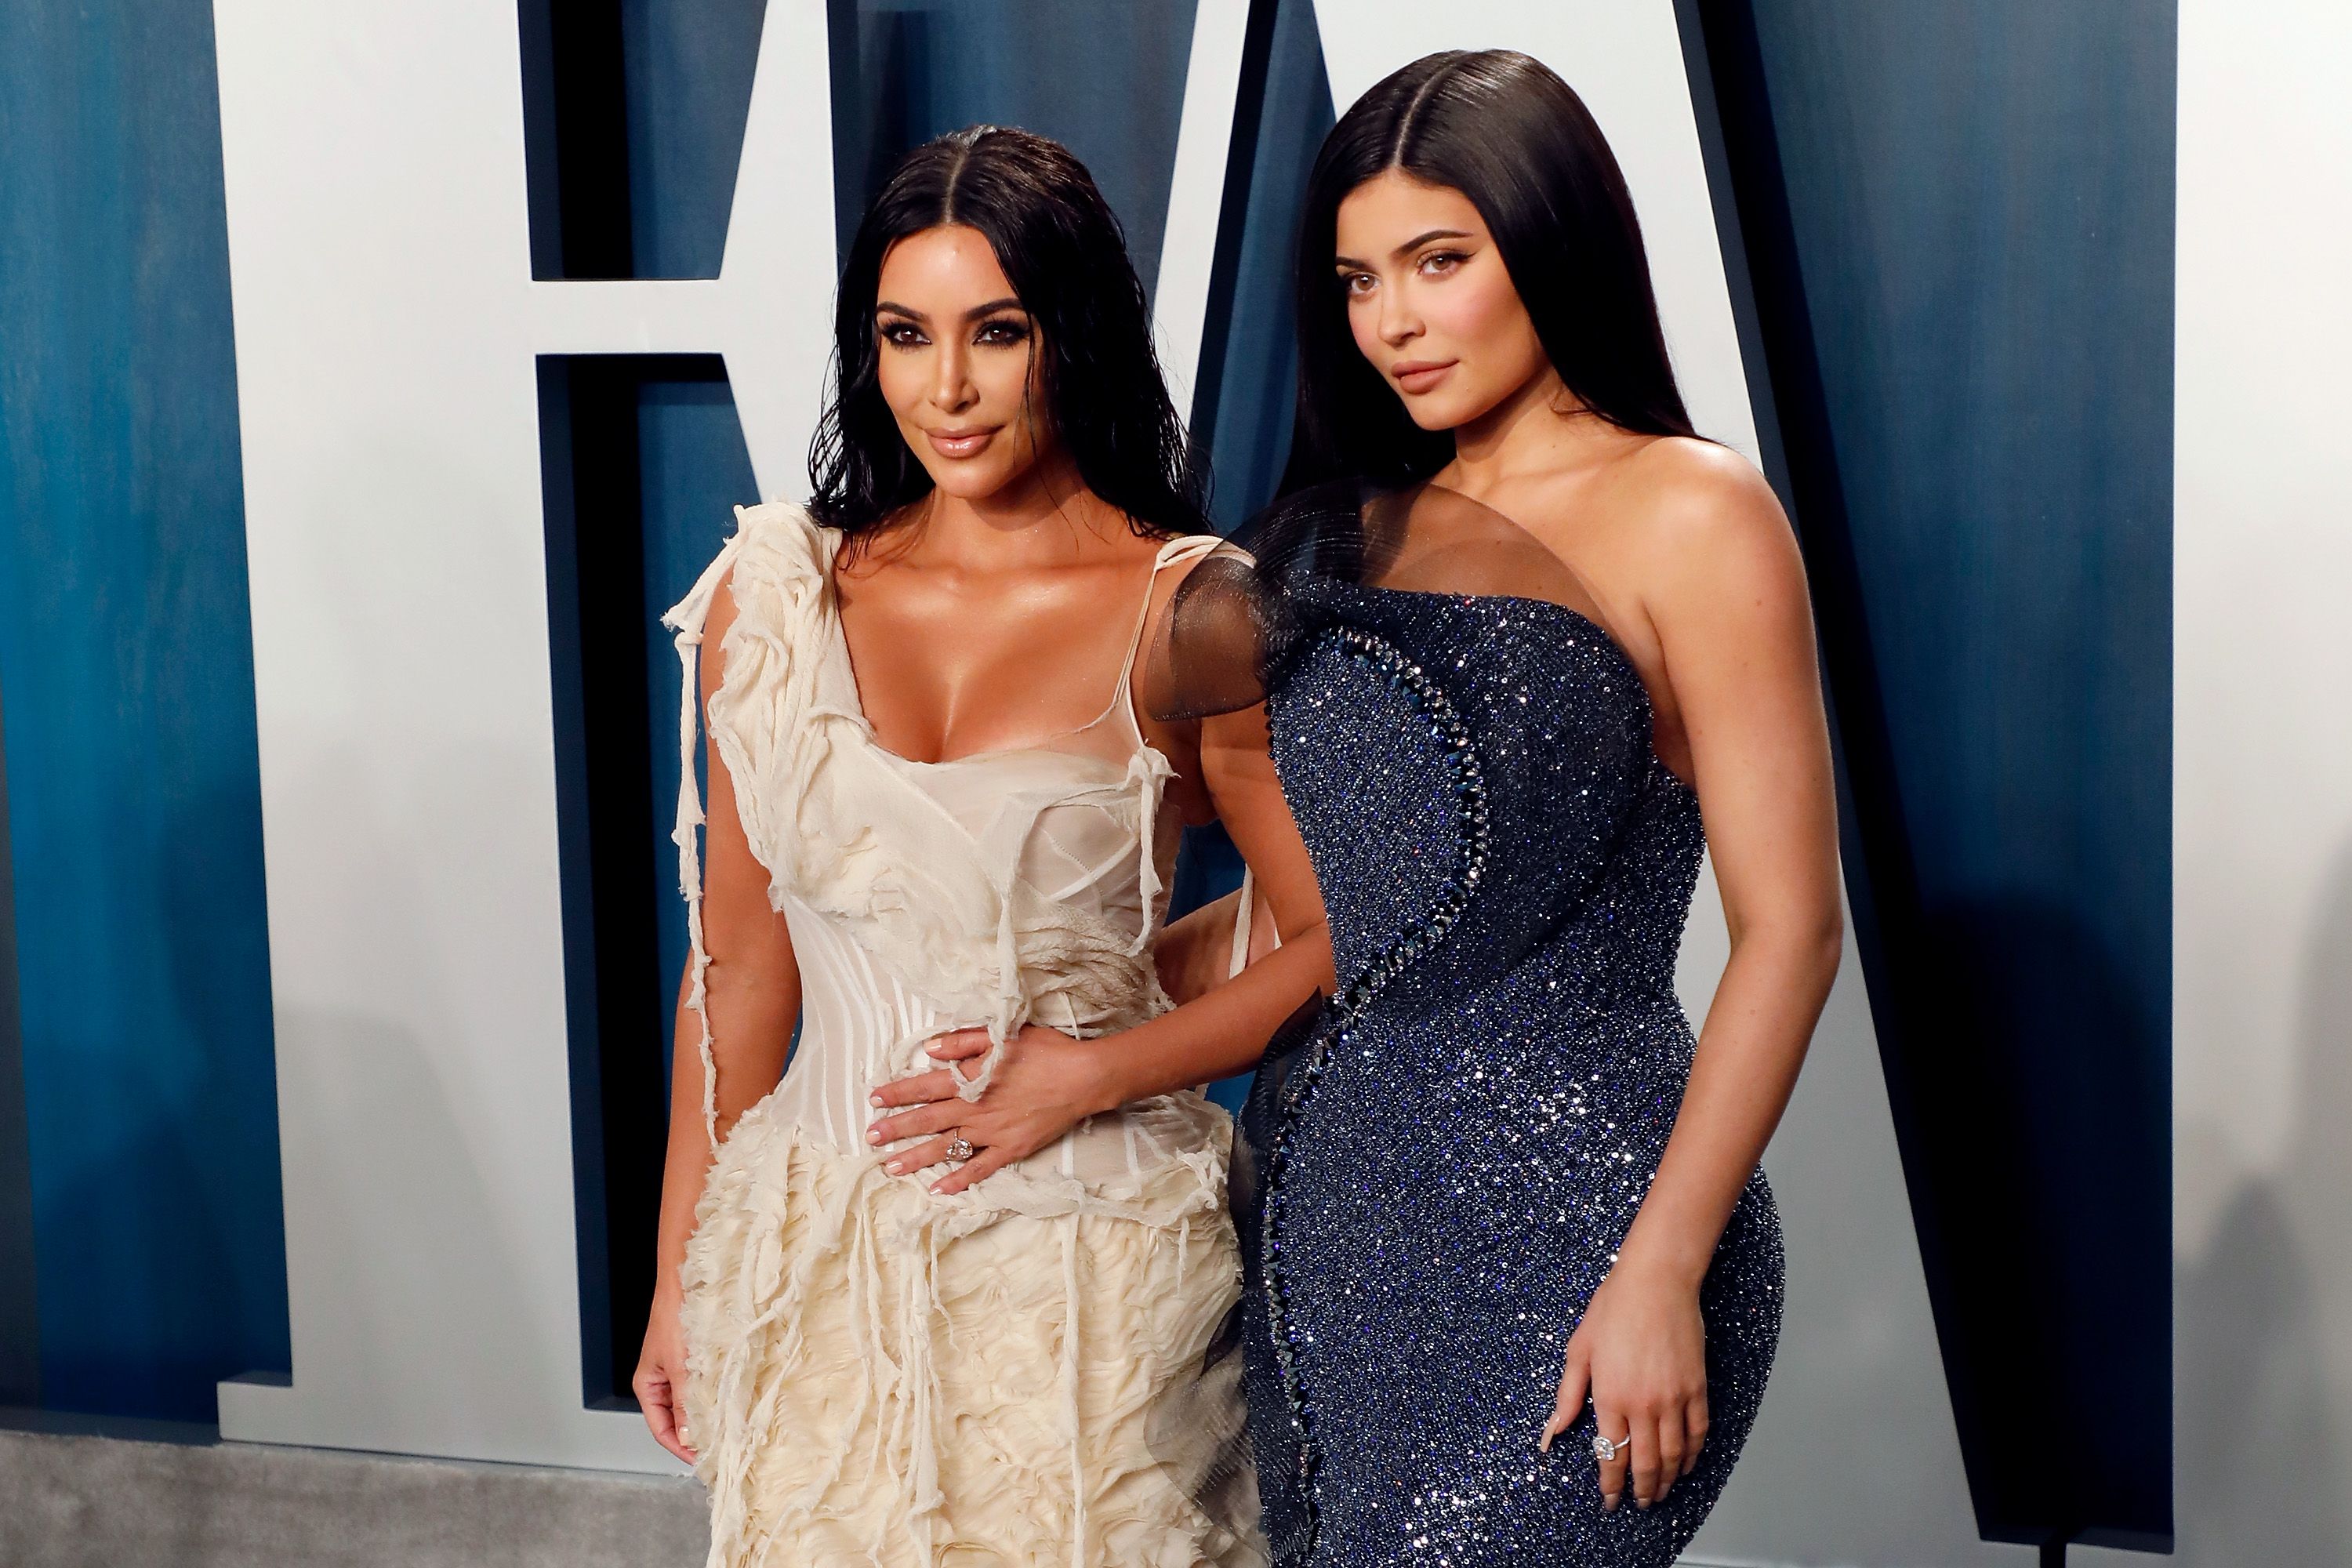 Kim Kardashian West and Kylie Jenner at the Vanity Fair Oscars Afterparty 2020| Photo: Getty Images